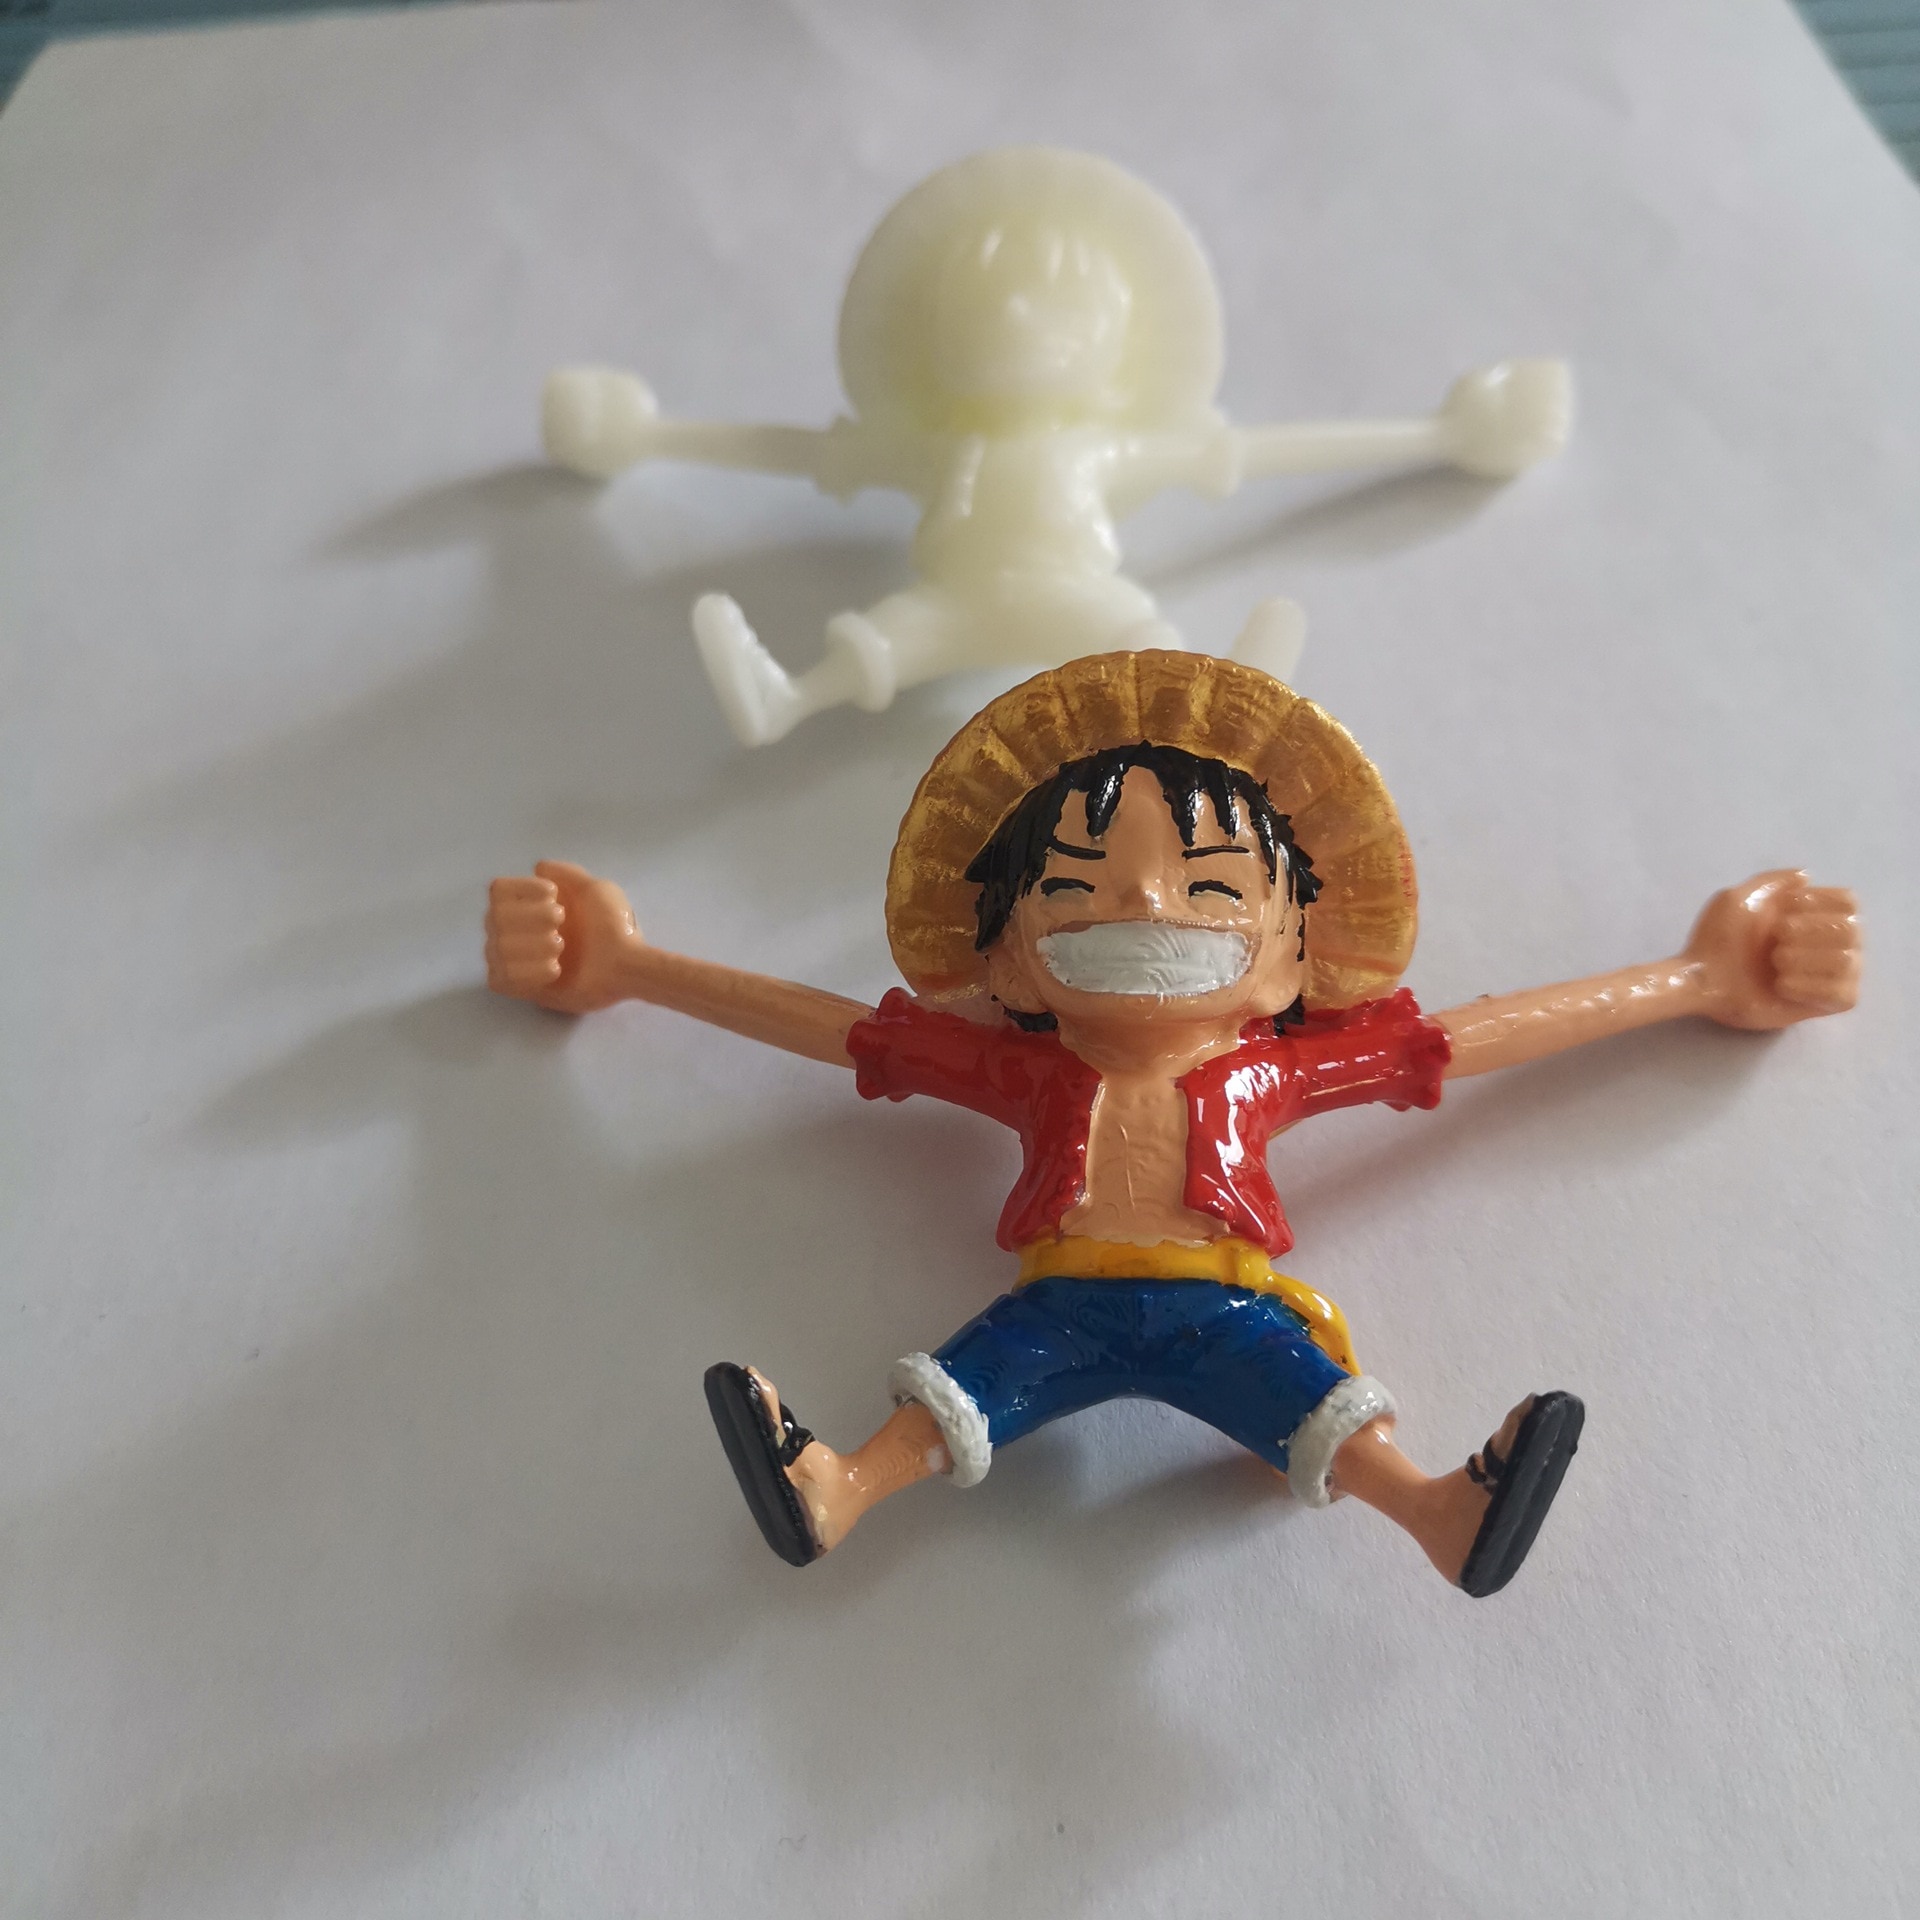 One Piece – Luffy action figure for holding a mask (Box/No Box) Action & Toy Figures